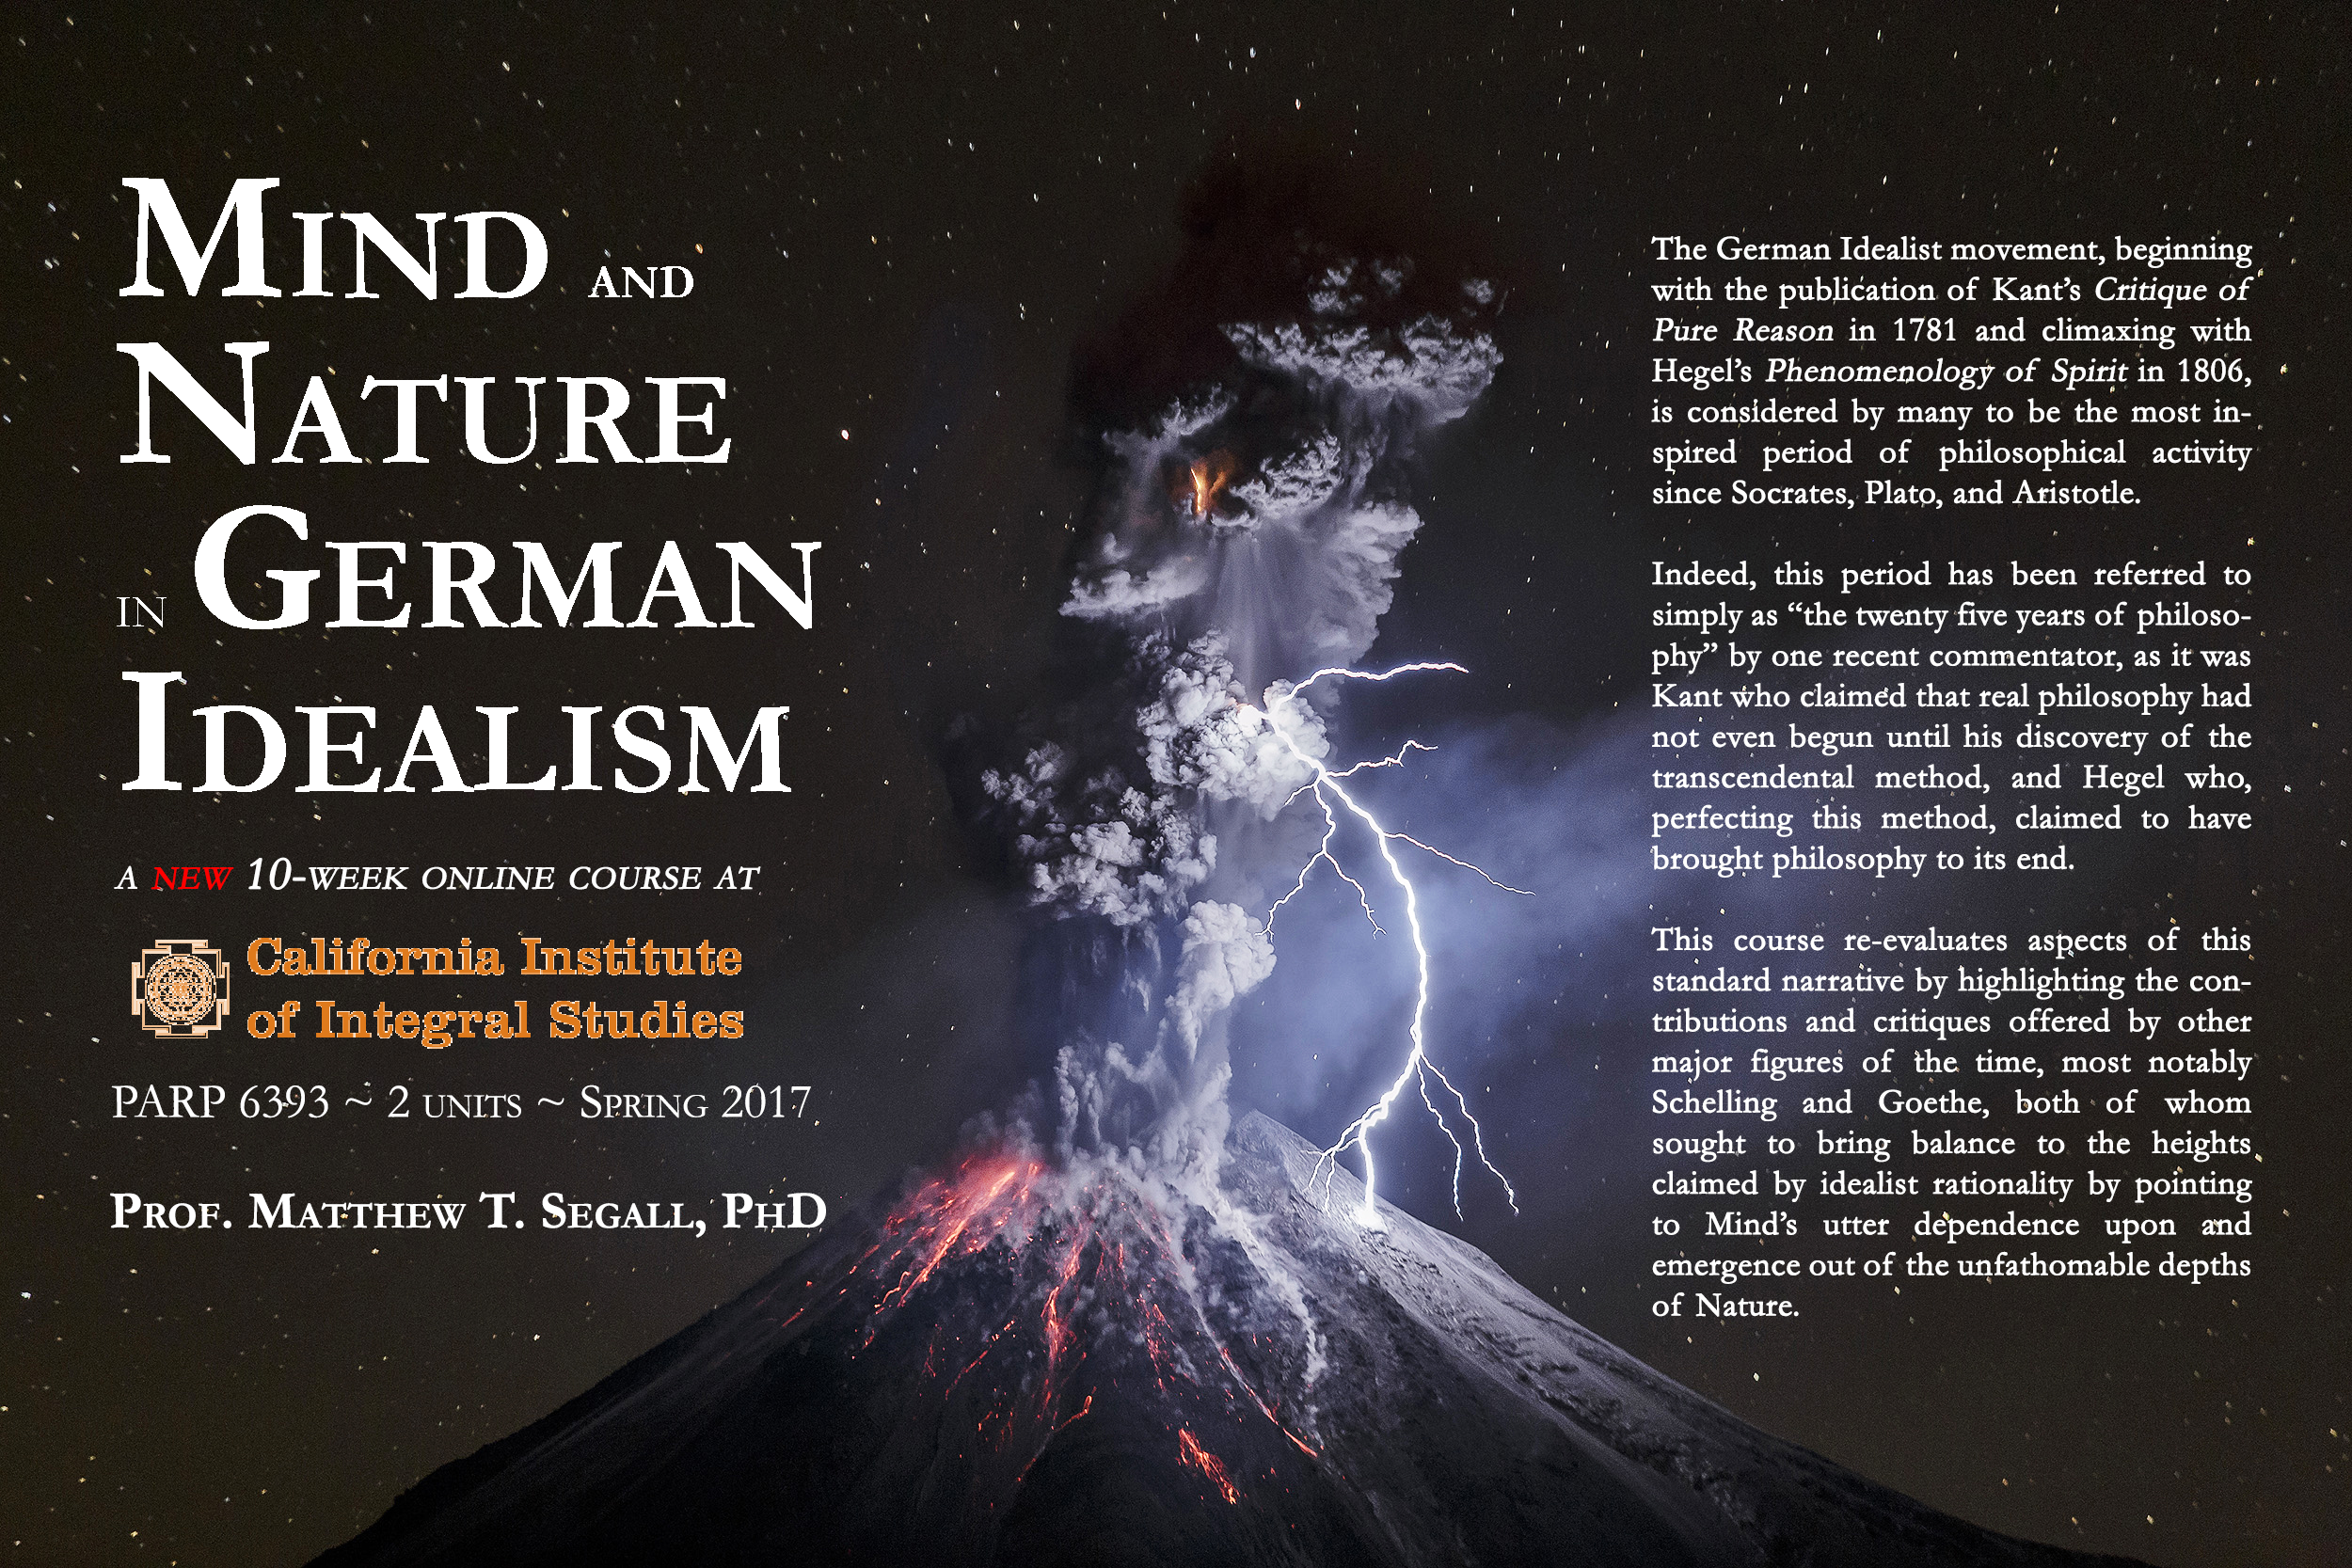 mind-and-nature-in-german-idealism-flyer